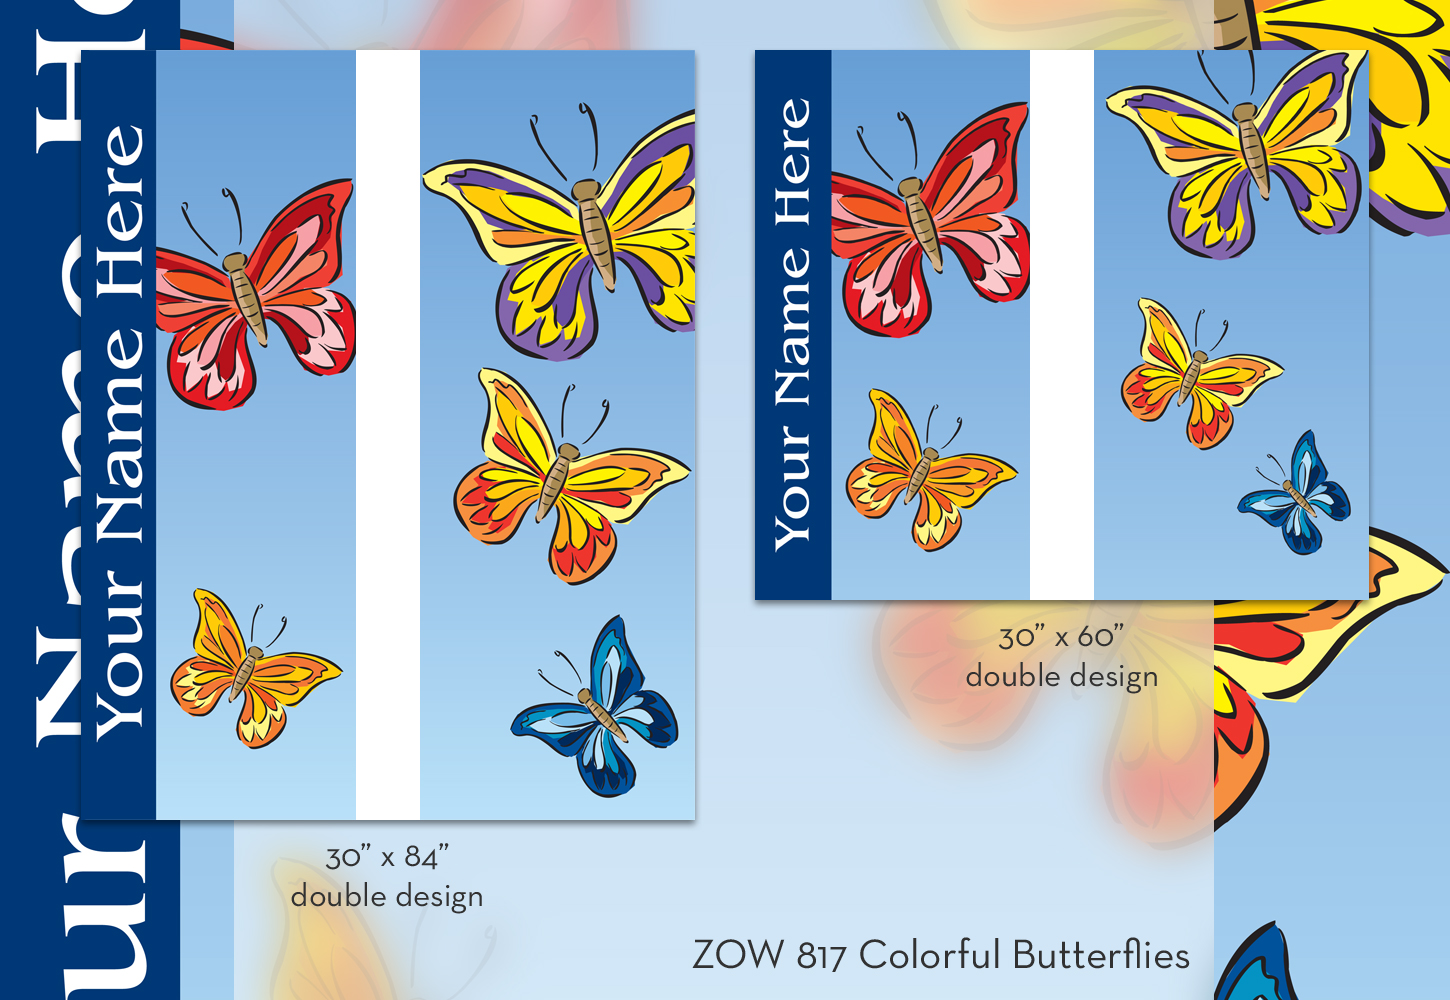 ZOW 817 Colorful Butterflies